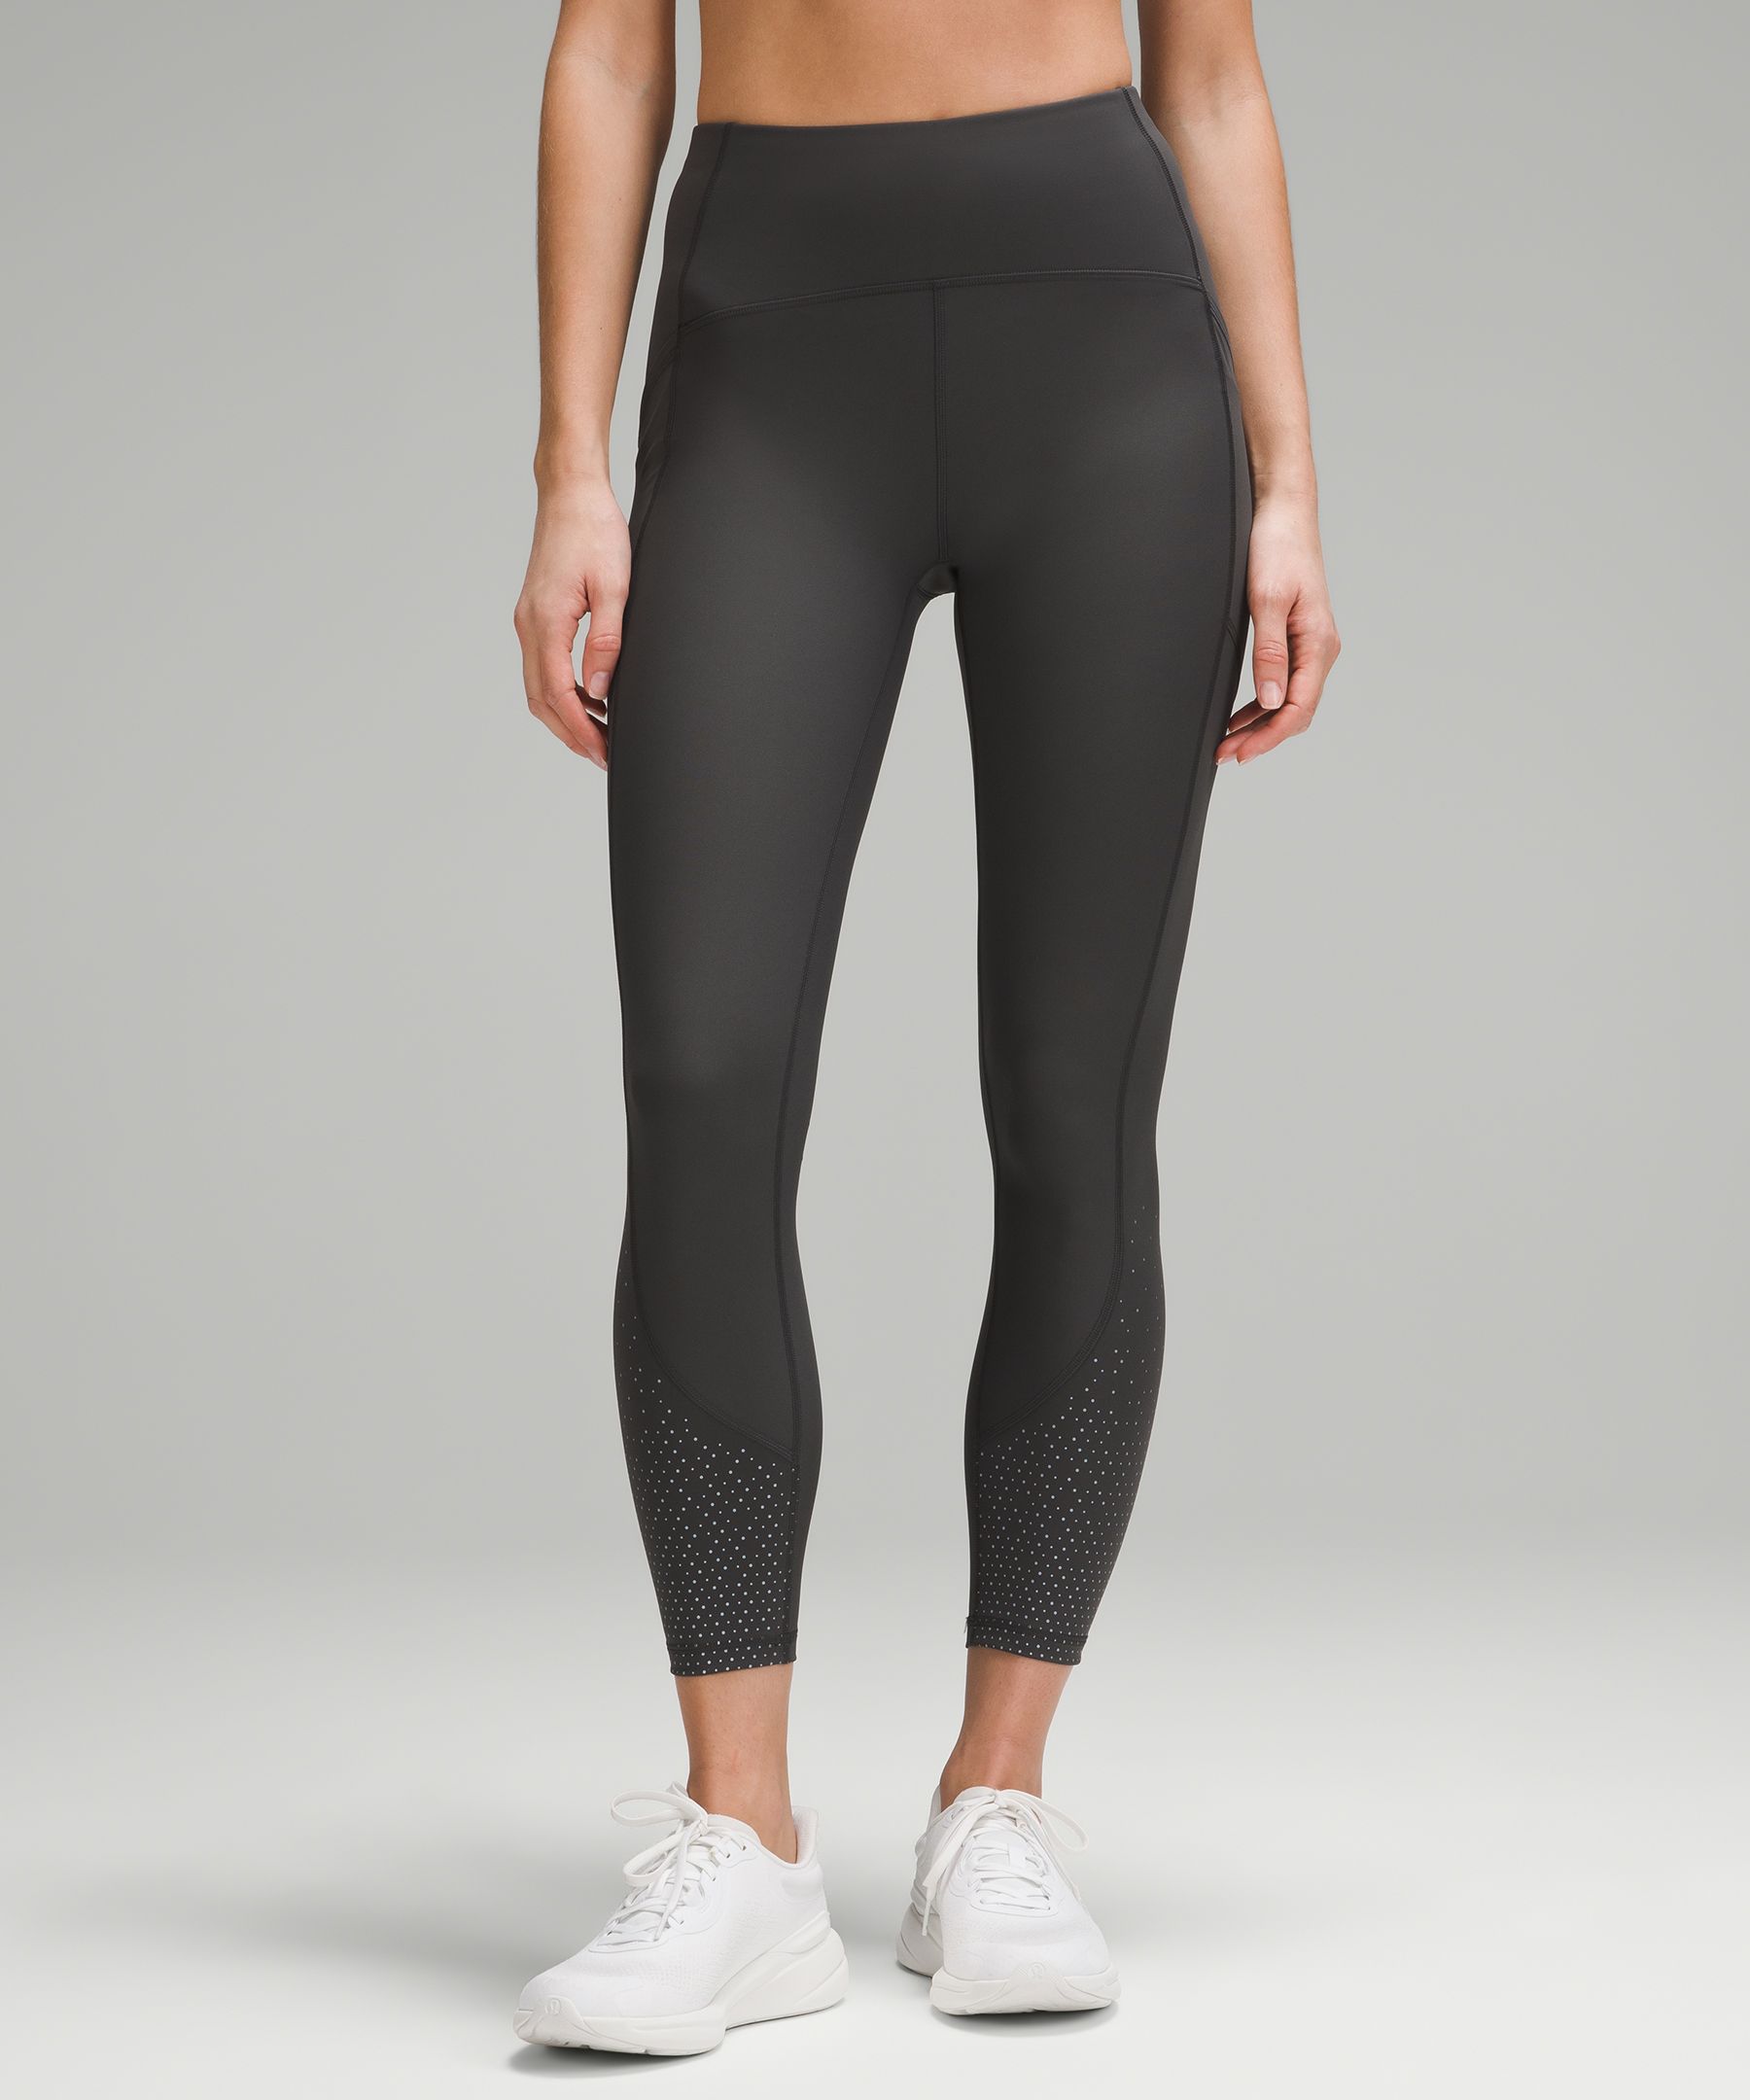 Lululemon Tight Stuff Tight II (25) leggings Nocturnal Teal Size 6 - $23 -  From Isabelle